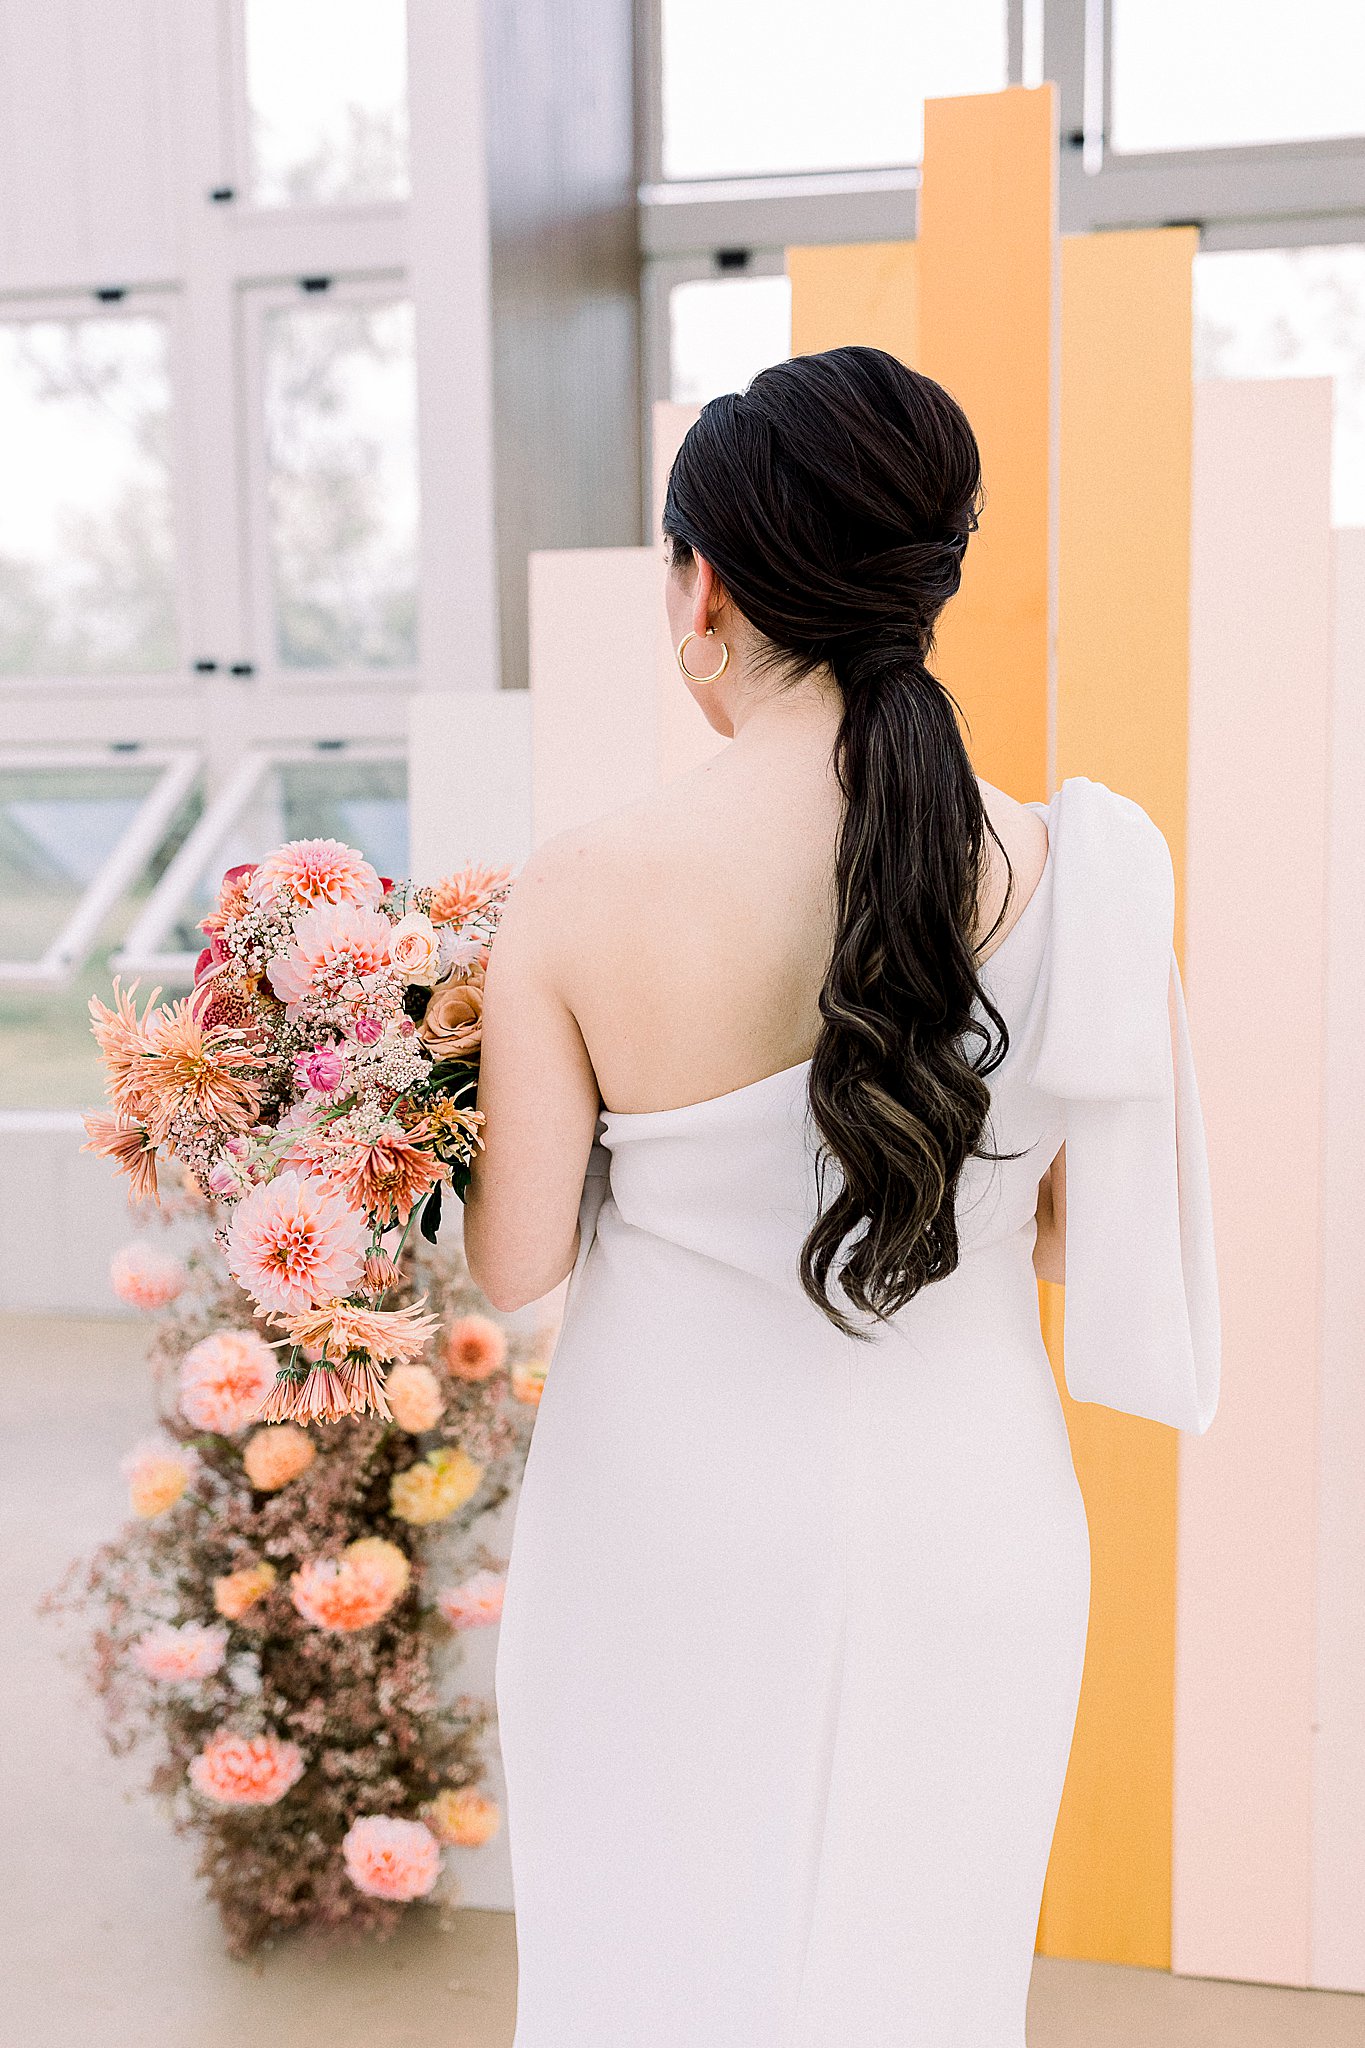 Bridal wedding gown back with peach florals, wedding hair inspiration